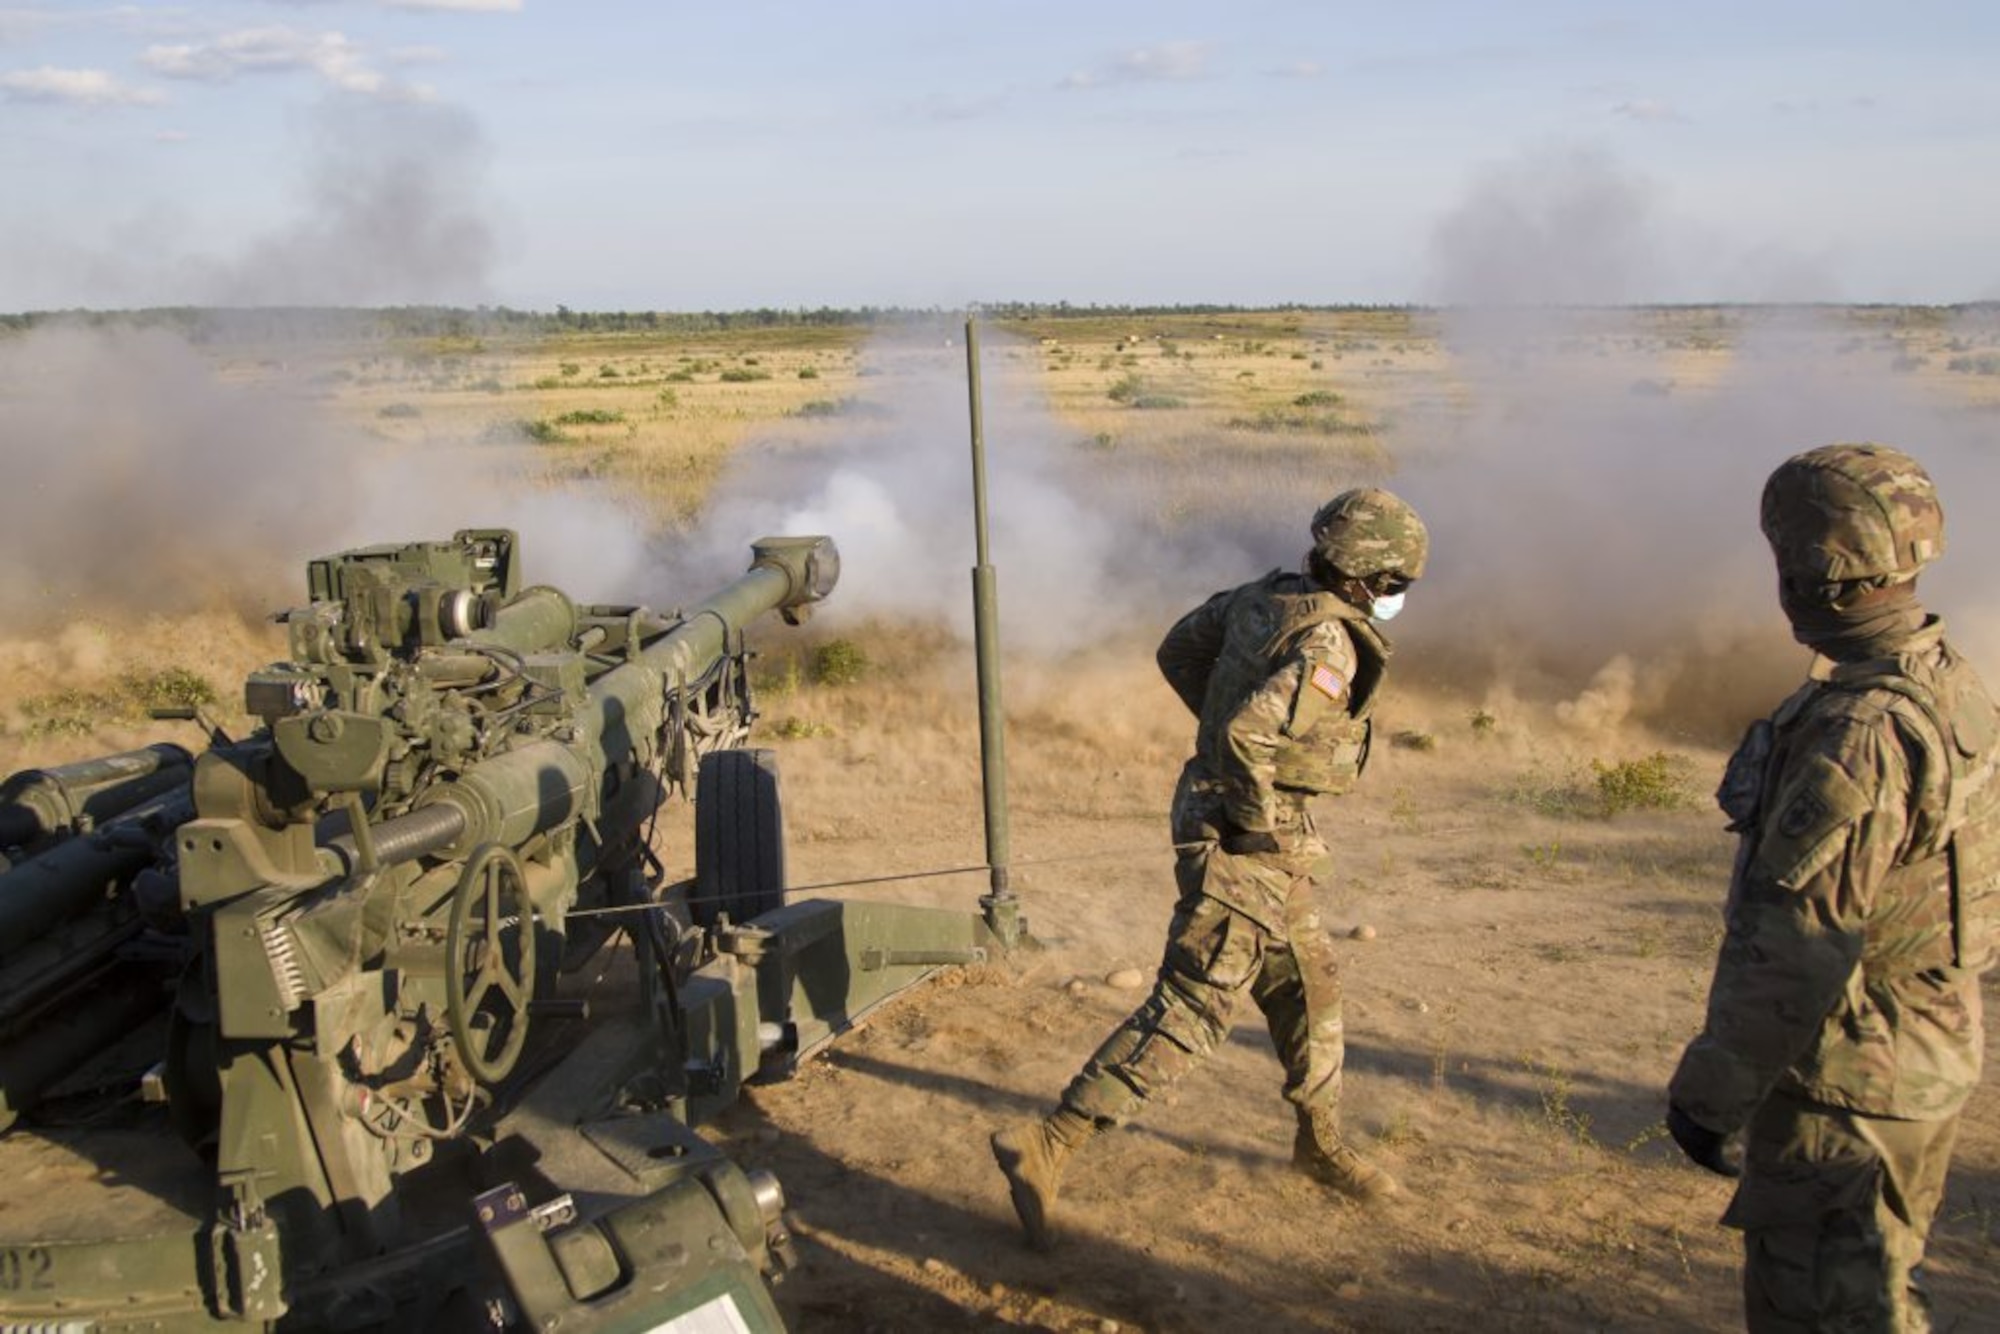 A U.S. Army Soldiers assigned to Bravo Battery, 1st Battalion, 119th Field Artillery Regiment, Michigan Army National Guard, fires a M777 155mm howitzer as part of a direct fire training exercise during Northern Strike 20, Camp Grayling, Michigan, July 25, 2020. The National All Domain Warfighting center in Northern Michigan, of which Camp Graying is a part, is the premier location to replicate the future operating environment, benefiting military readiness. (U.S. Army photo by Sgt. Adam Parent)